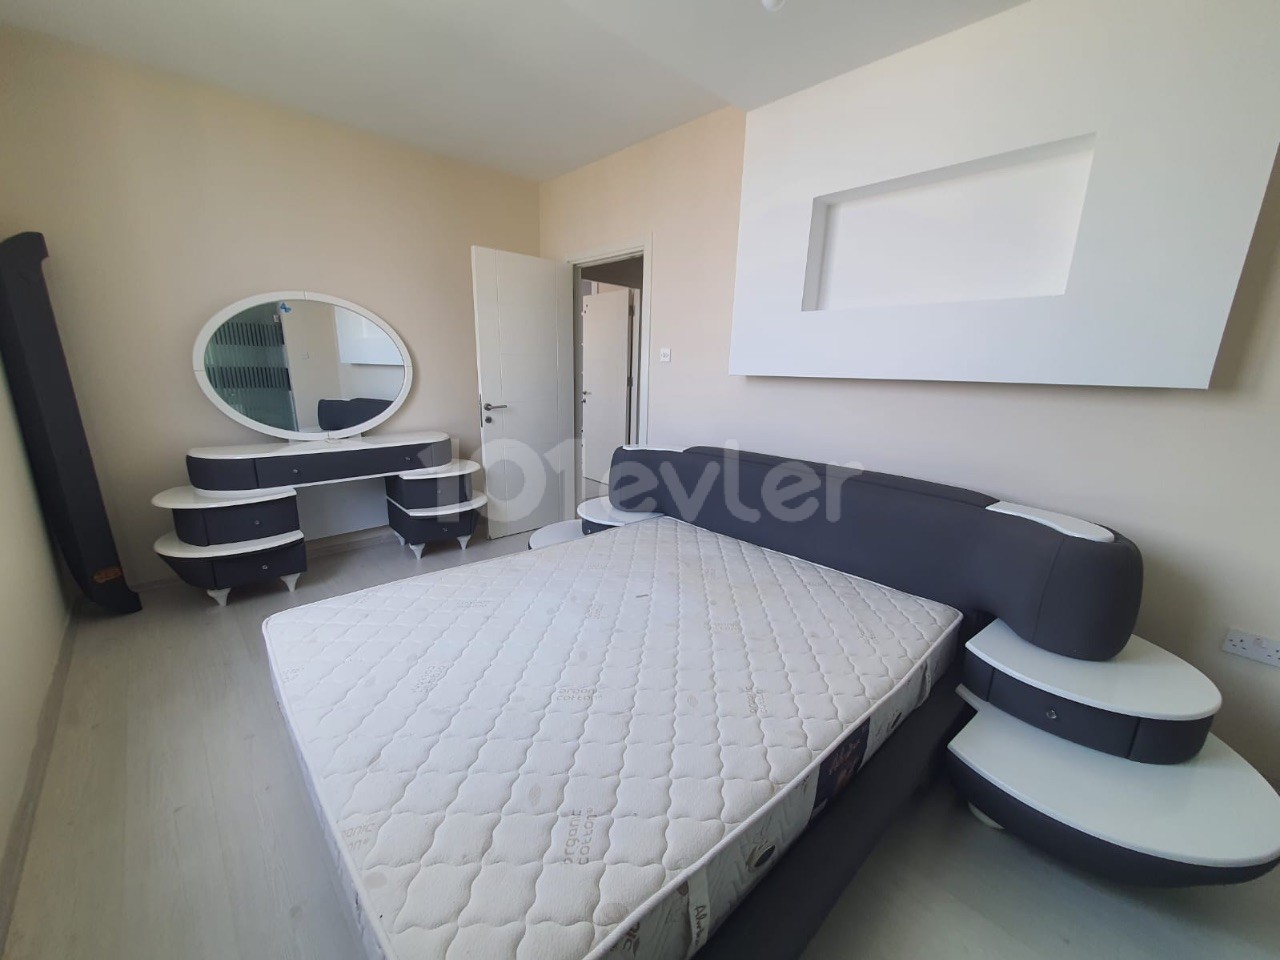 2+1 FURNISHED APARTMENT FOR RENT IN CYPRUS GİRNE CENTER, EXCELLENT LOCATION